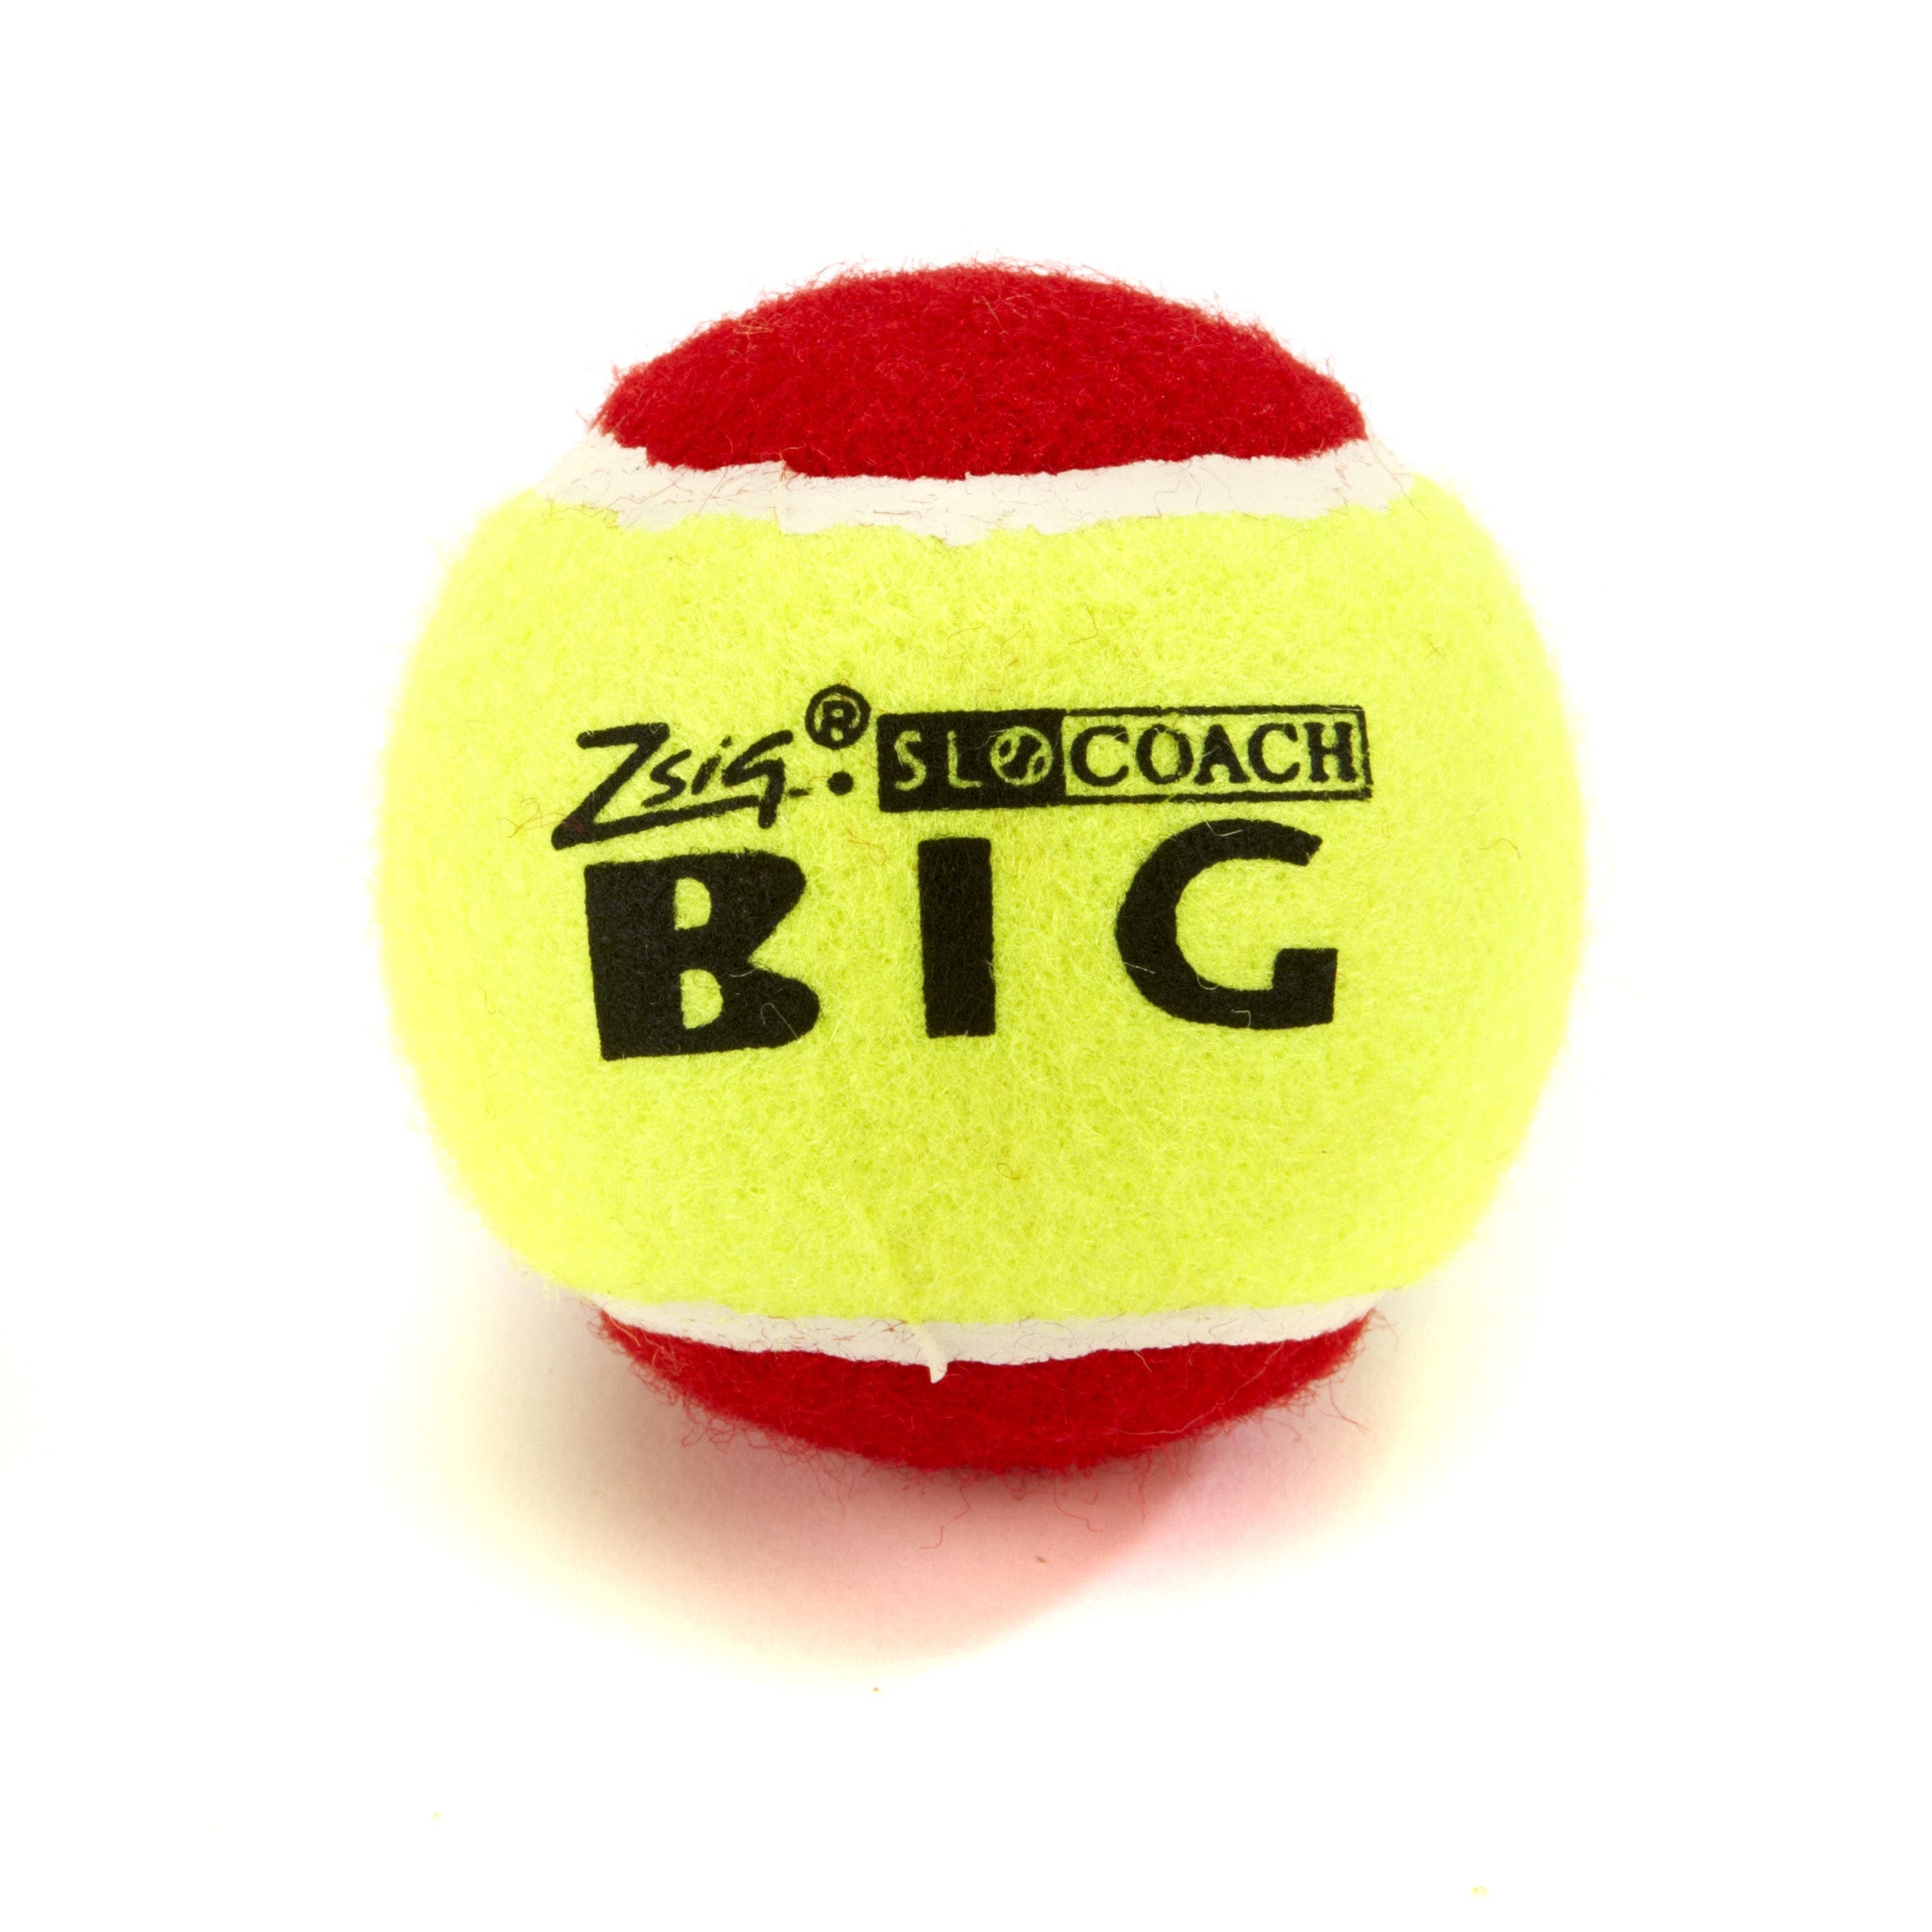 Zsig Slocoach Big Red Mini Tennis Ball for Red Stage & Stage 3 coaching